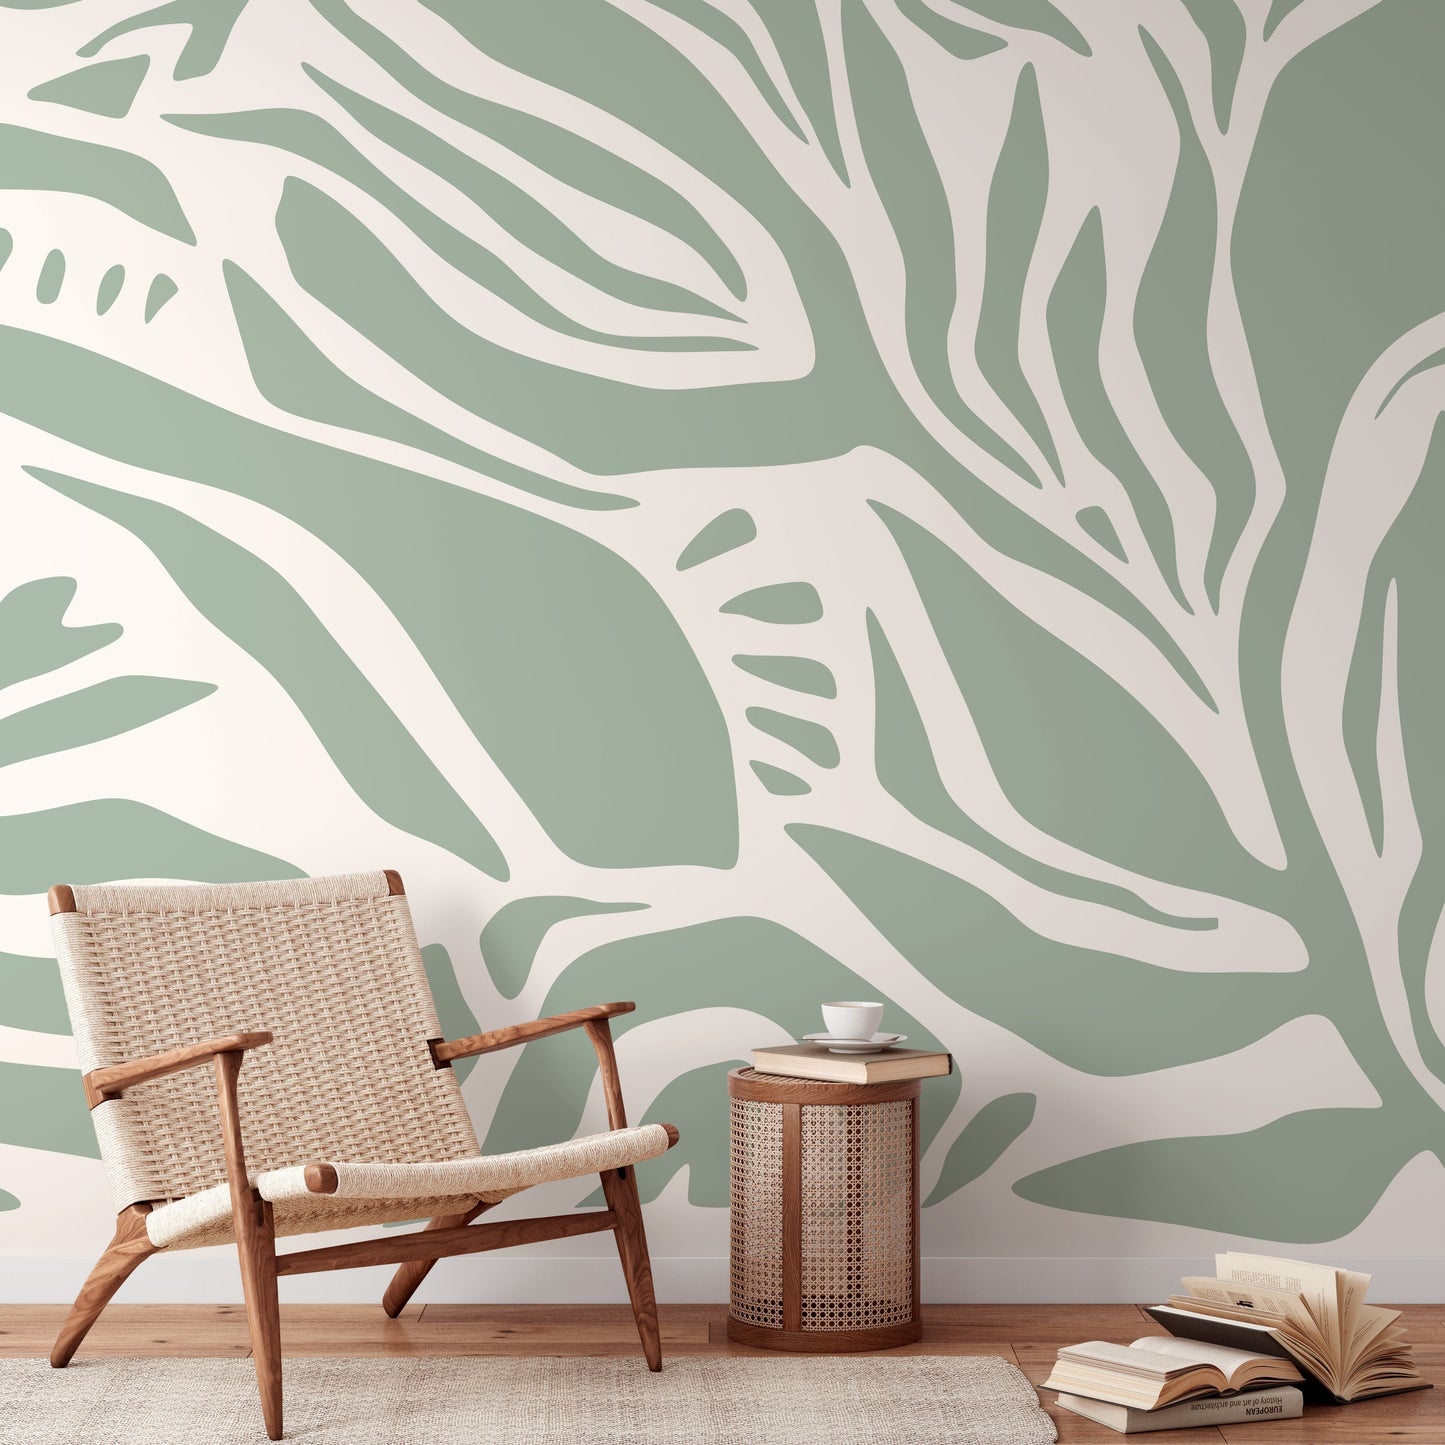 Light Green Abstract Art Wallpaper Large Boho Wallpaper Peel and Stick and Traditional Wallpaper - D627